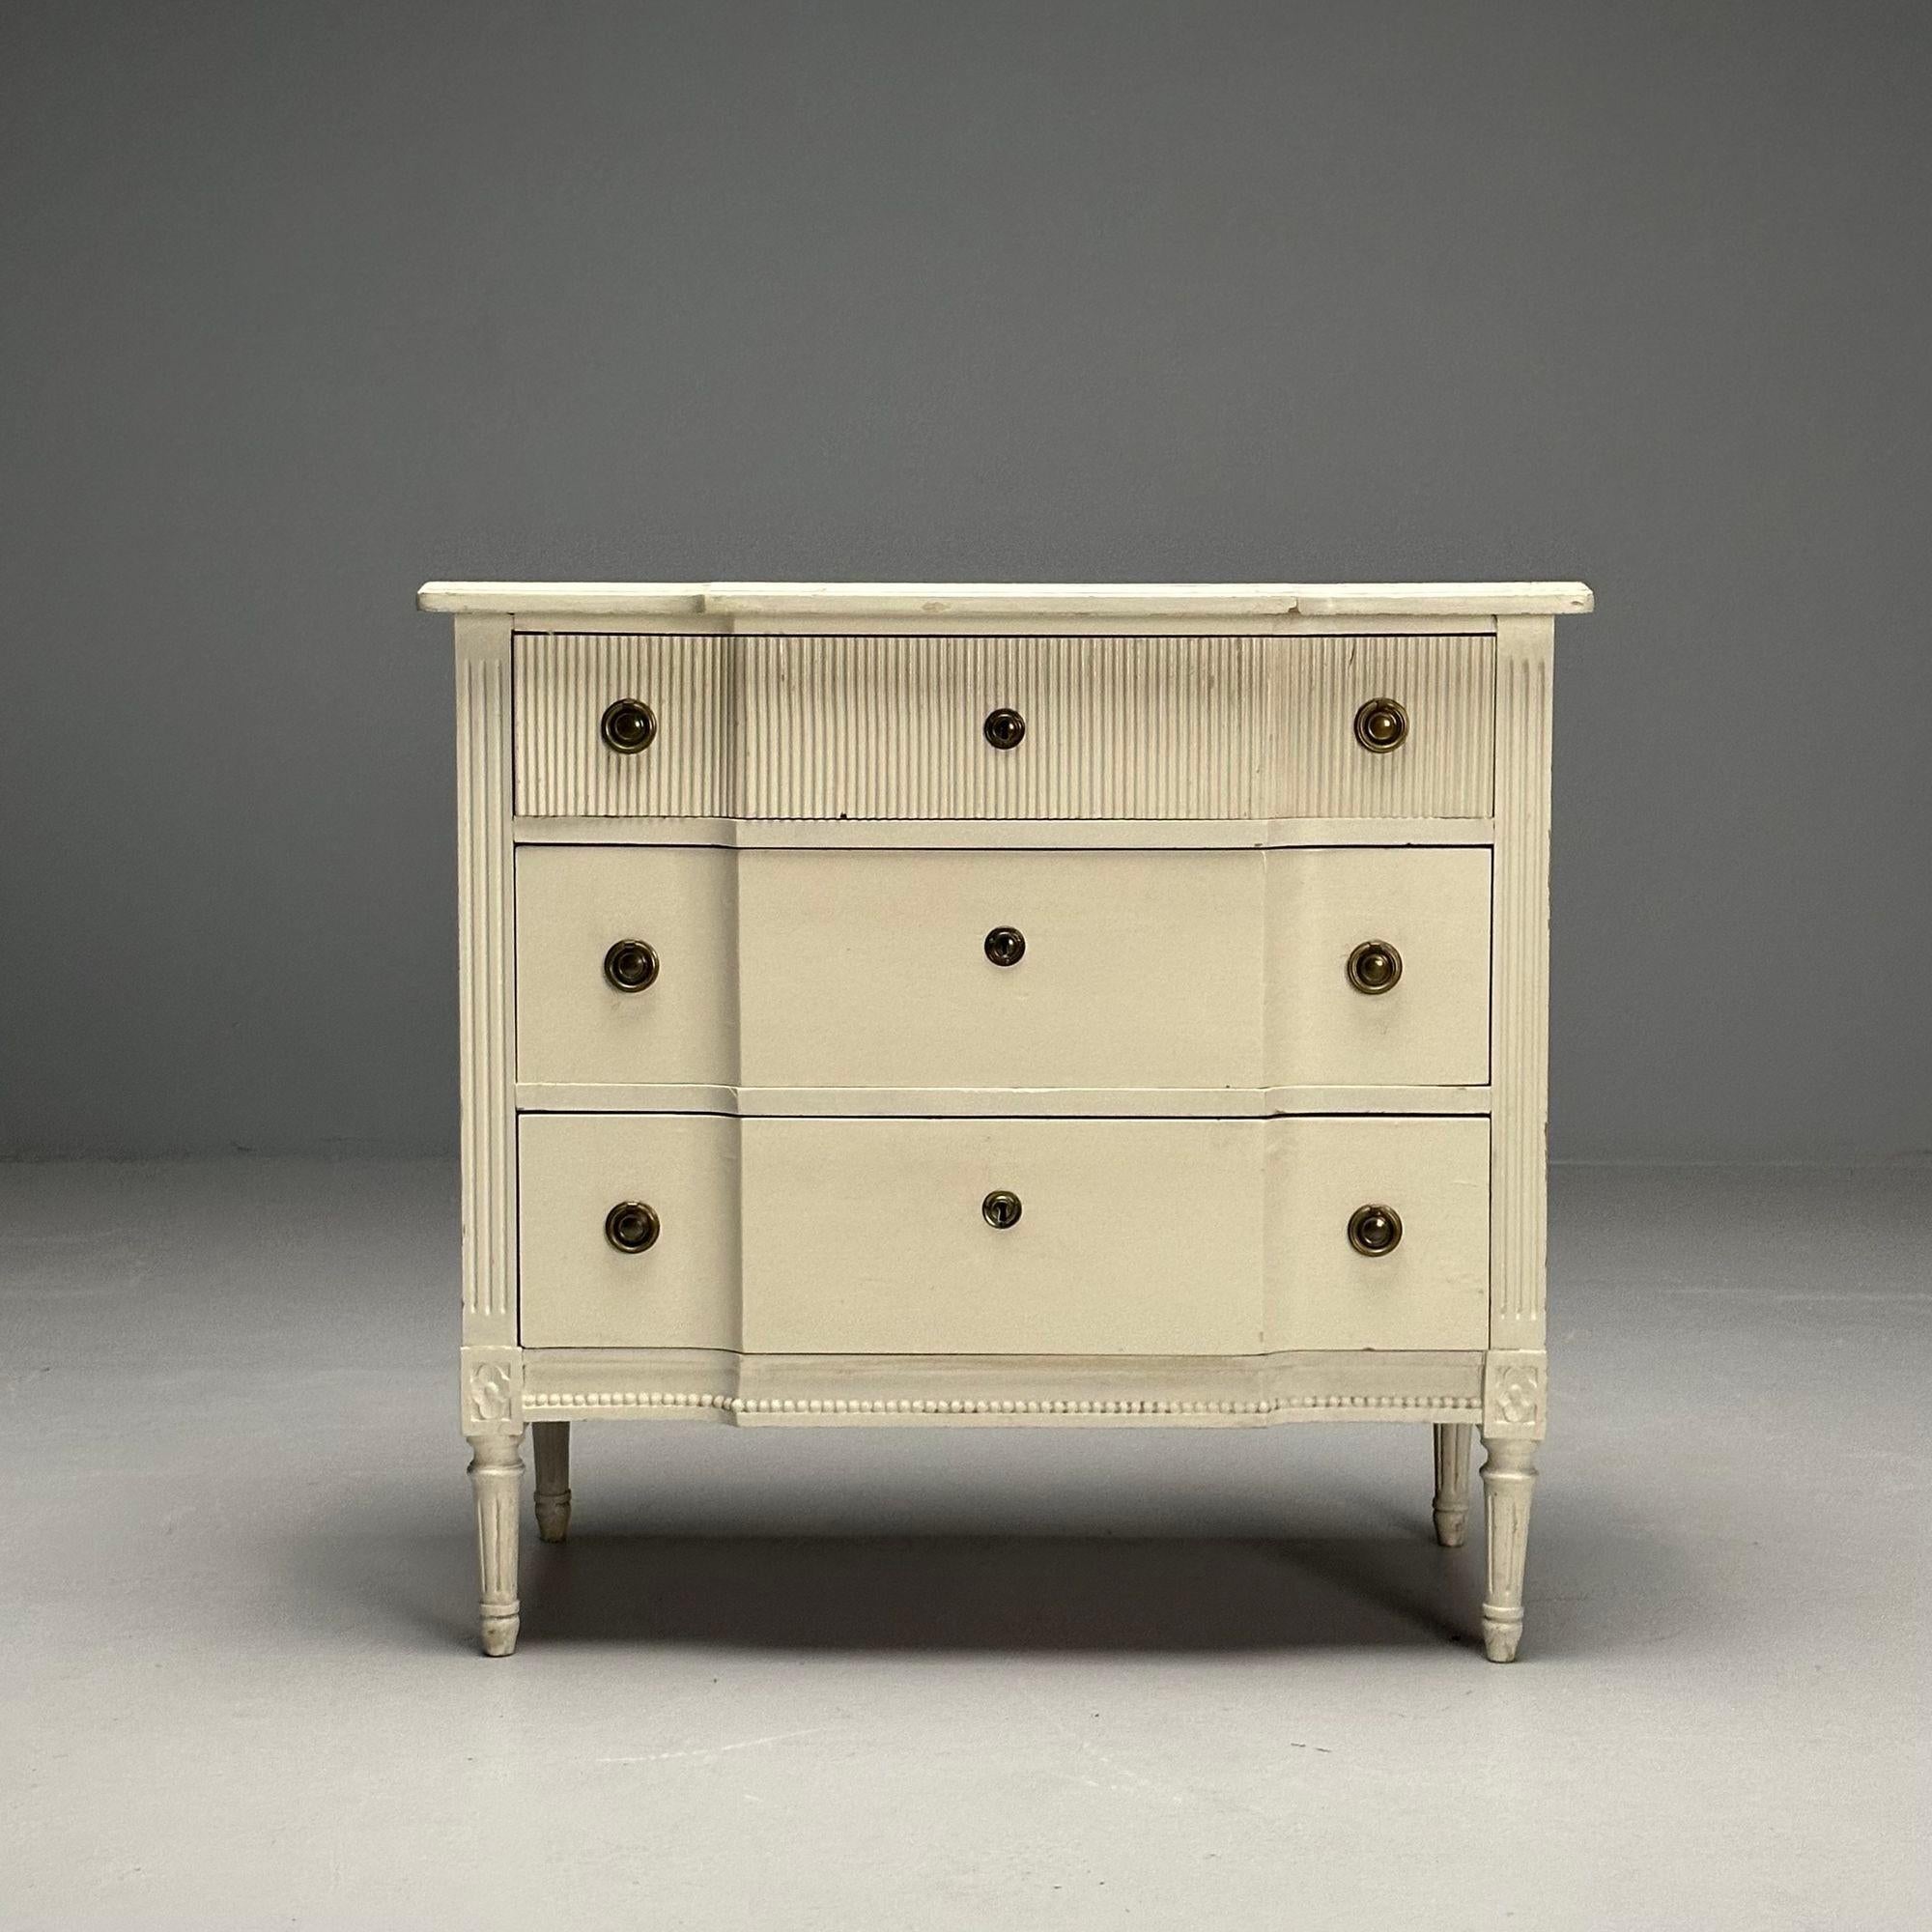 Gustavian, Swedish Commode, Louis XVI Style, White Paint Distressed, Sweden, 1990s

Louis XVI style dresser or cabinet designed and produced in Sweden in the later half of the 20th century. This example has a white paint distressed finish, reeded